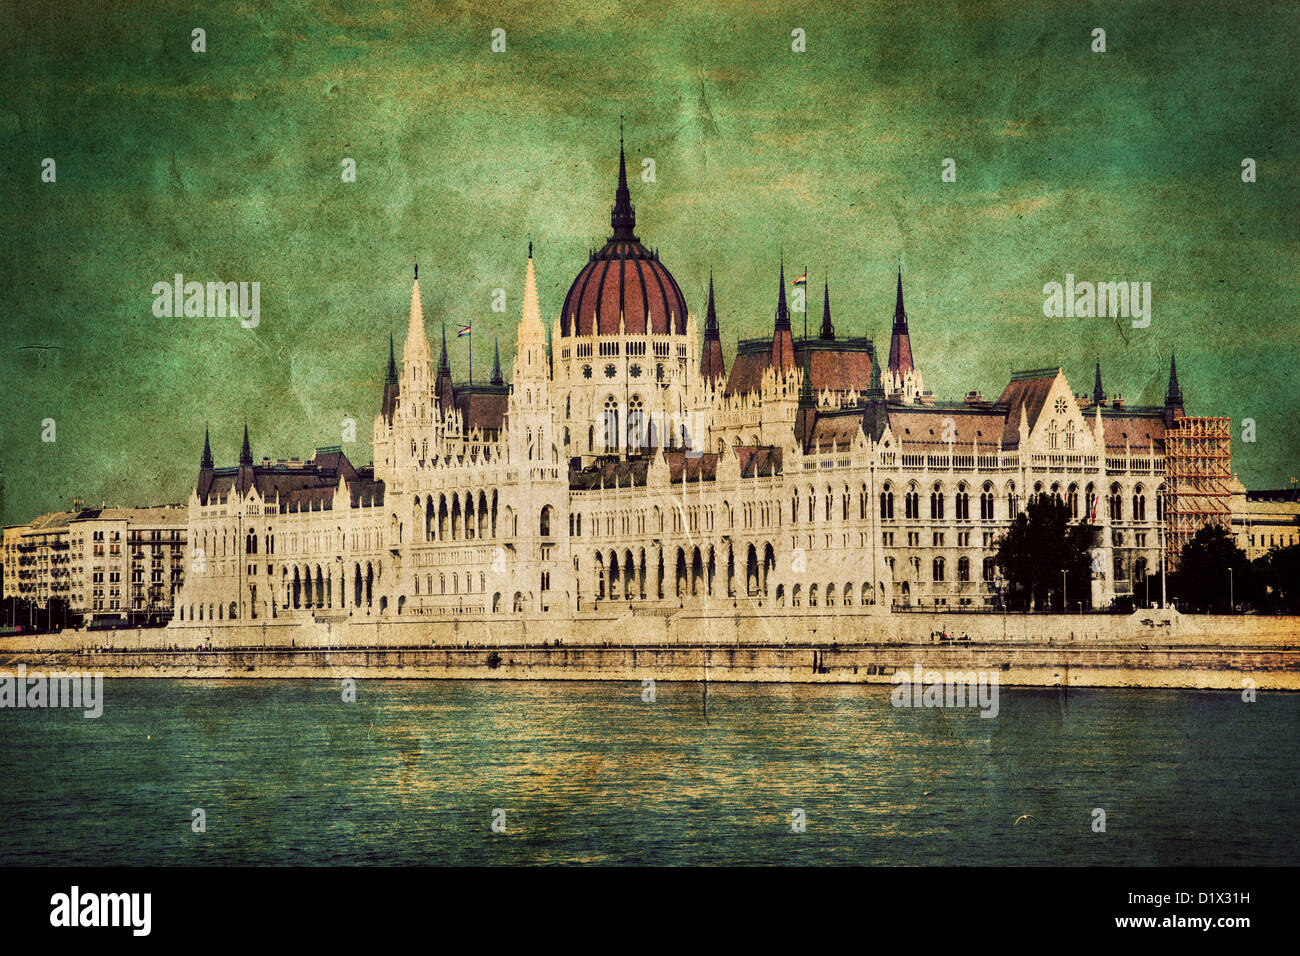 Retro photograph of Hungarian parliament building by Danube river. Budapest, Hungary. Vintage style Stock Photo